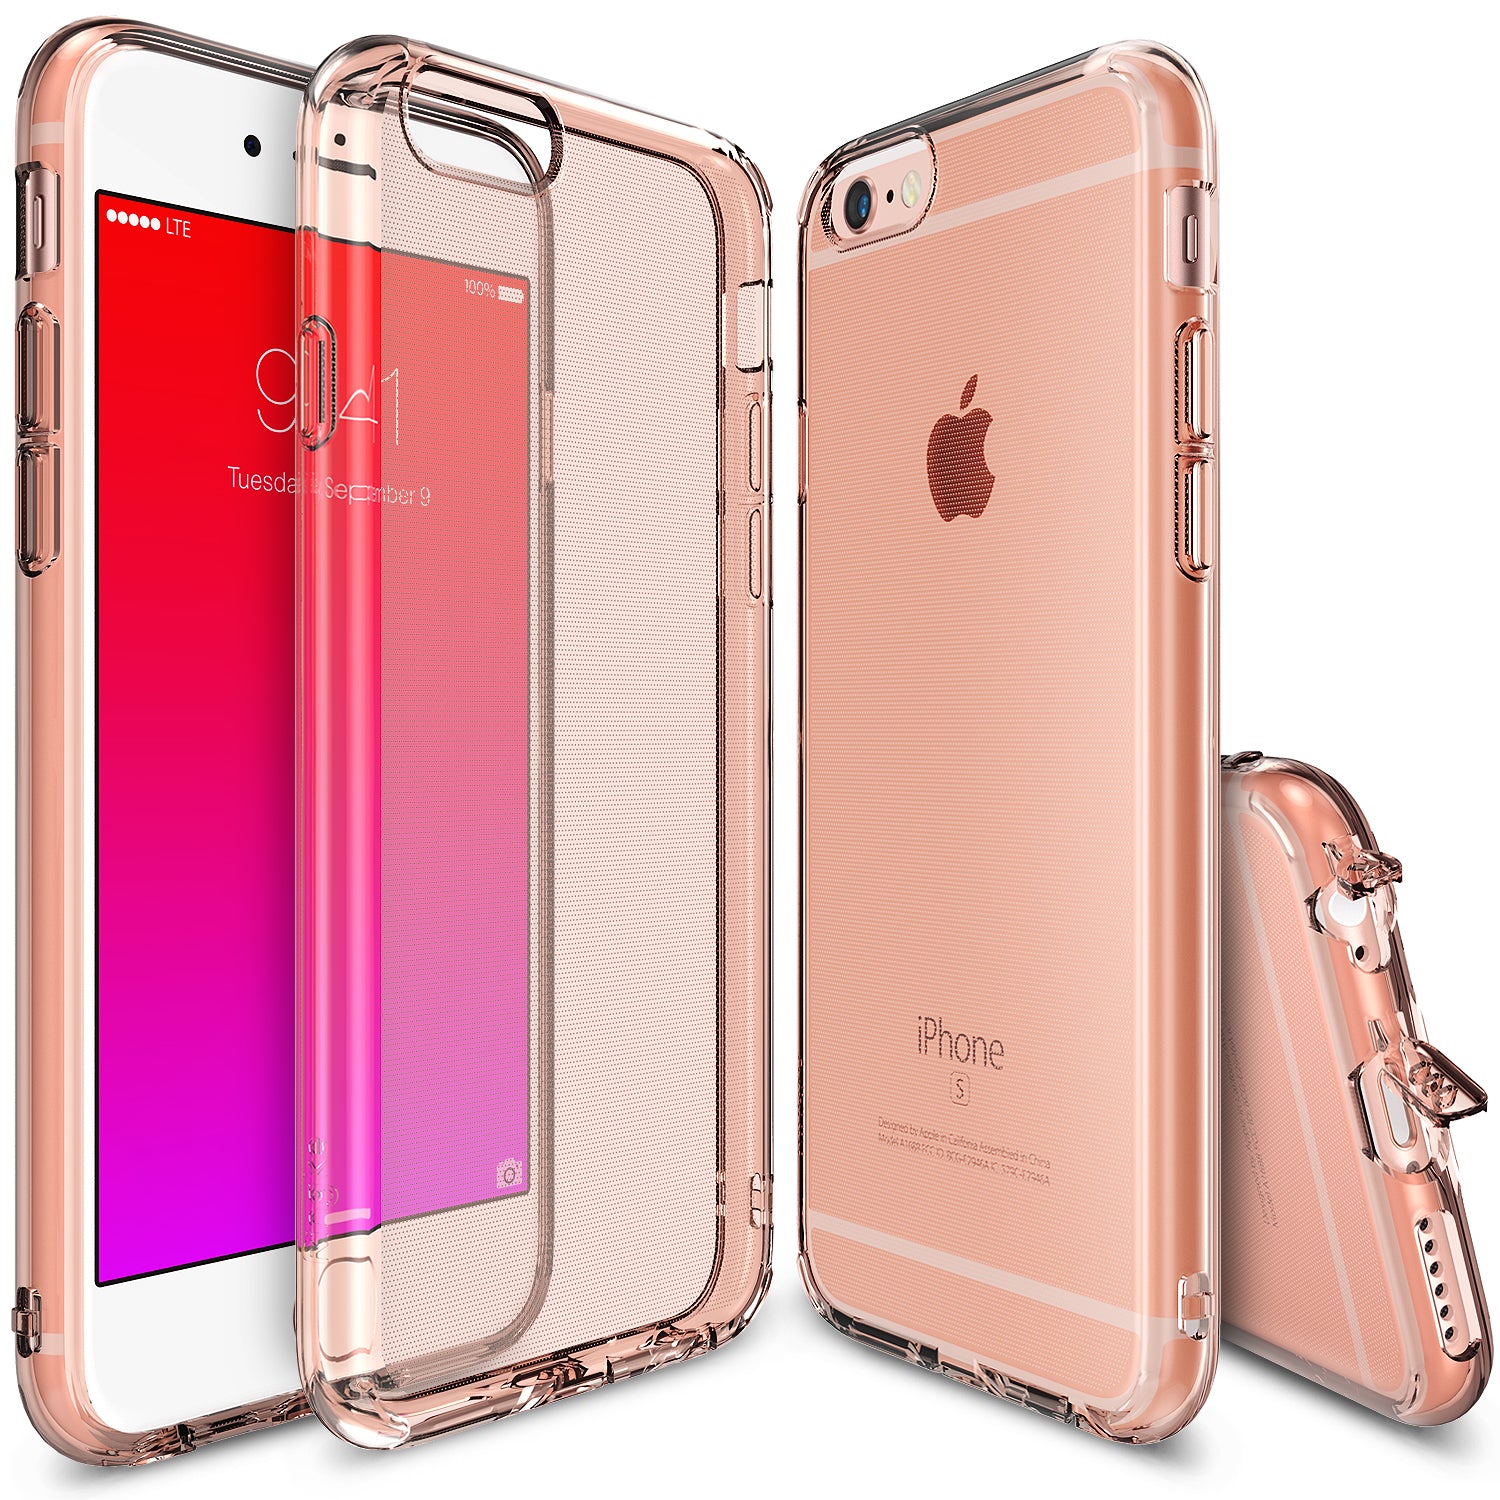 Cases for iPhone 6 Plus/6s Plus Air – Official Store